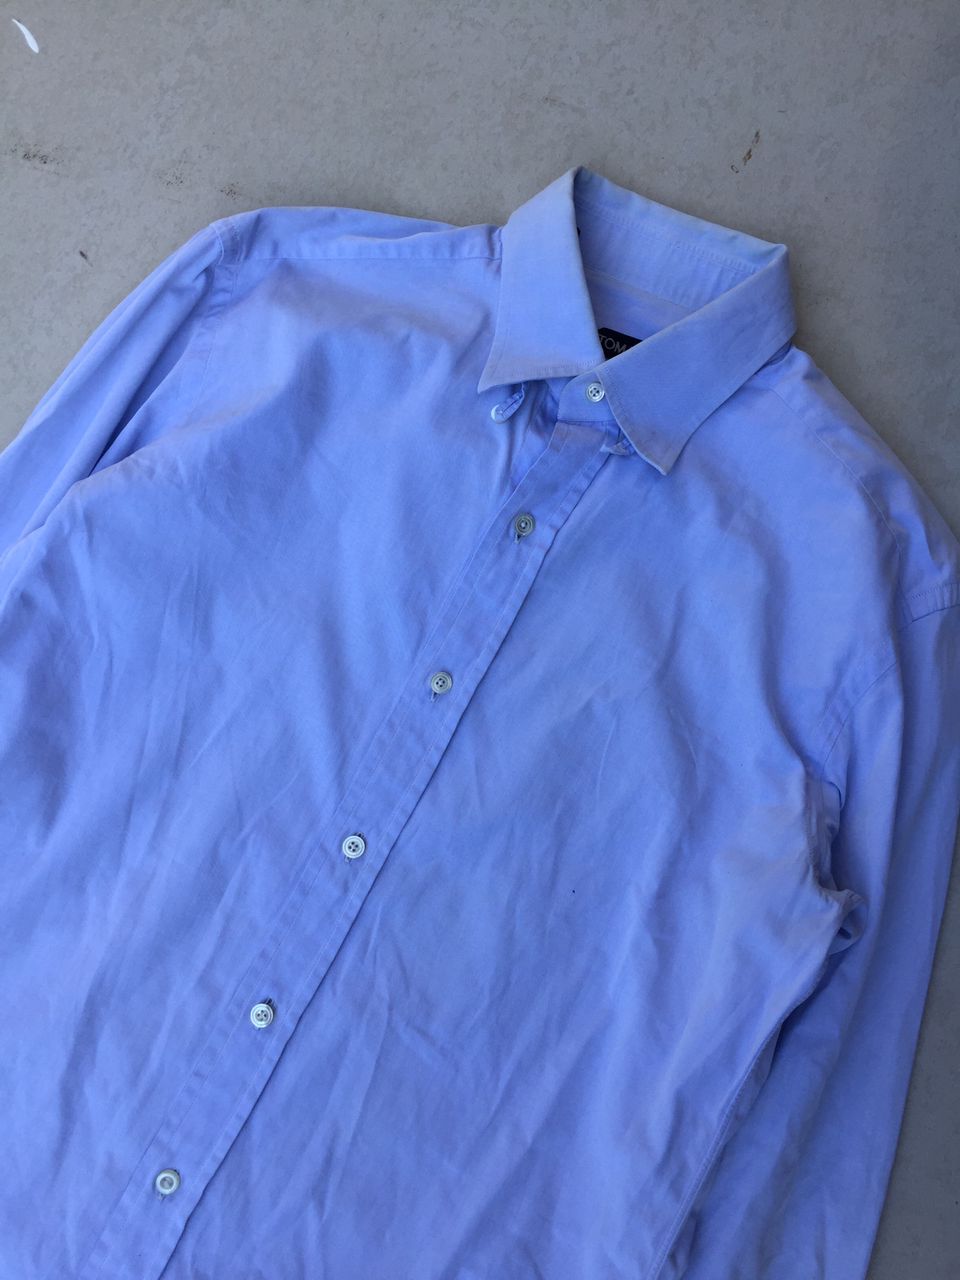 Tom Ford French Cuff button ups shirt - 2